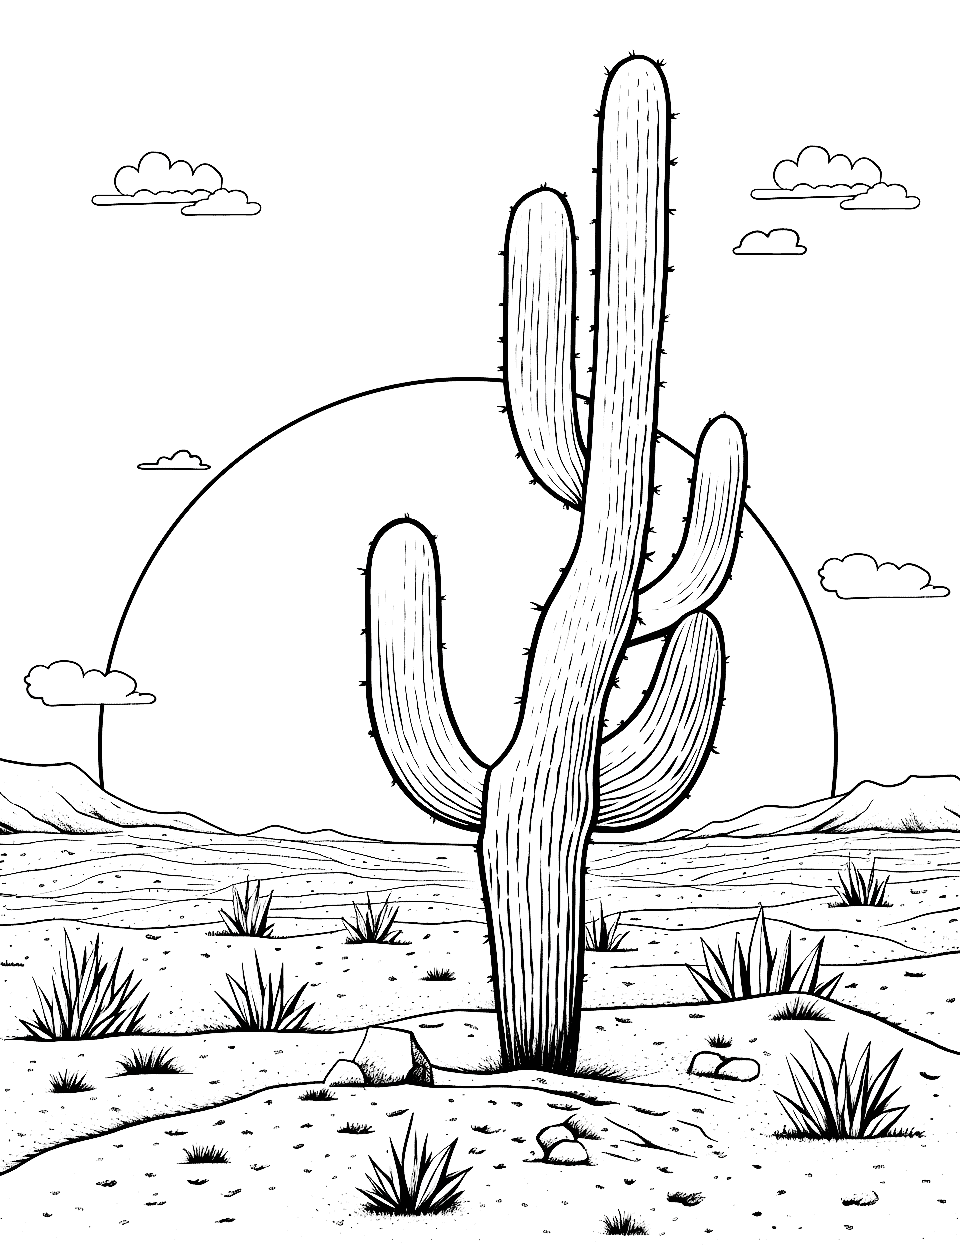 Aesthetic Desert Sunset Cactus Coloring Page - A serene desert landscape featuring a cactus, with a beautiful, colorful sunset in the background.